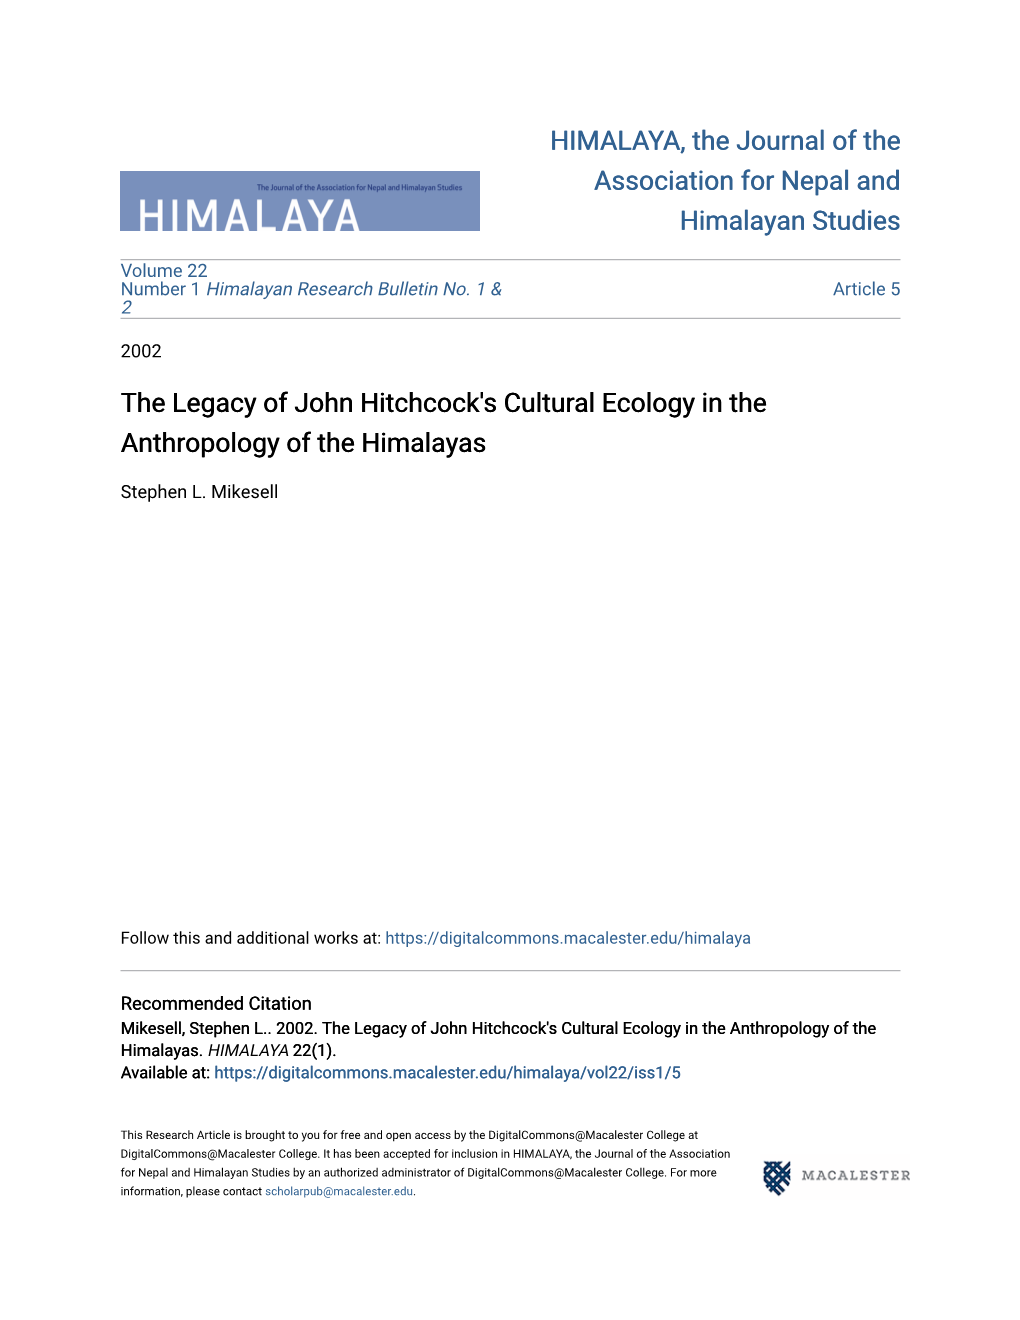 The Legacy of John Hitchcock's Cultural Ecology in the Anthropology of the Himalayas